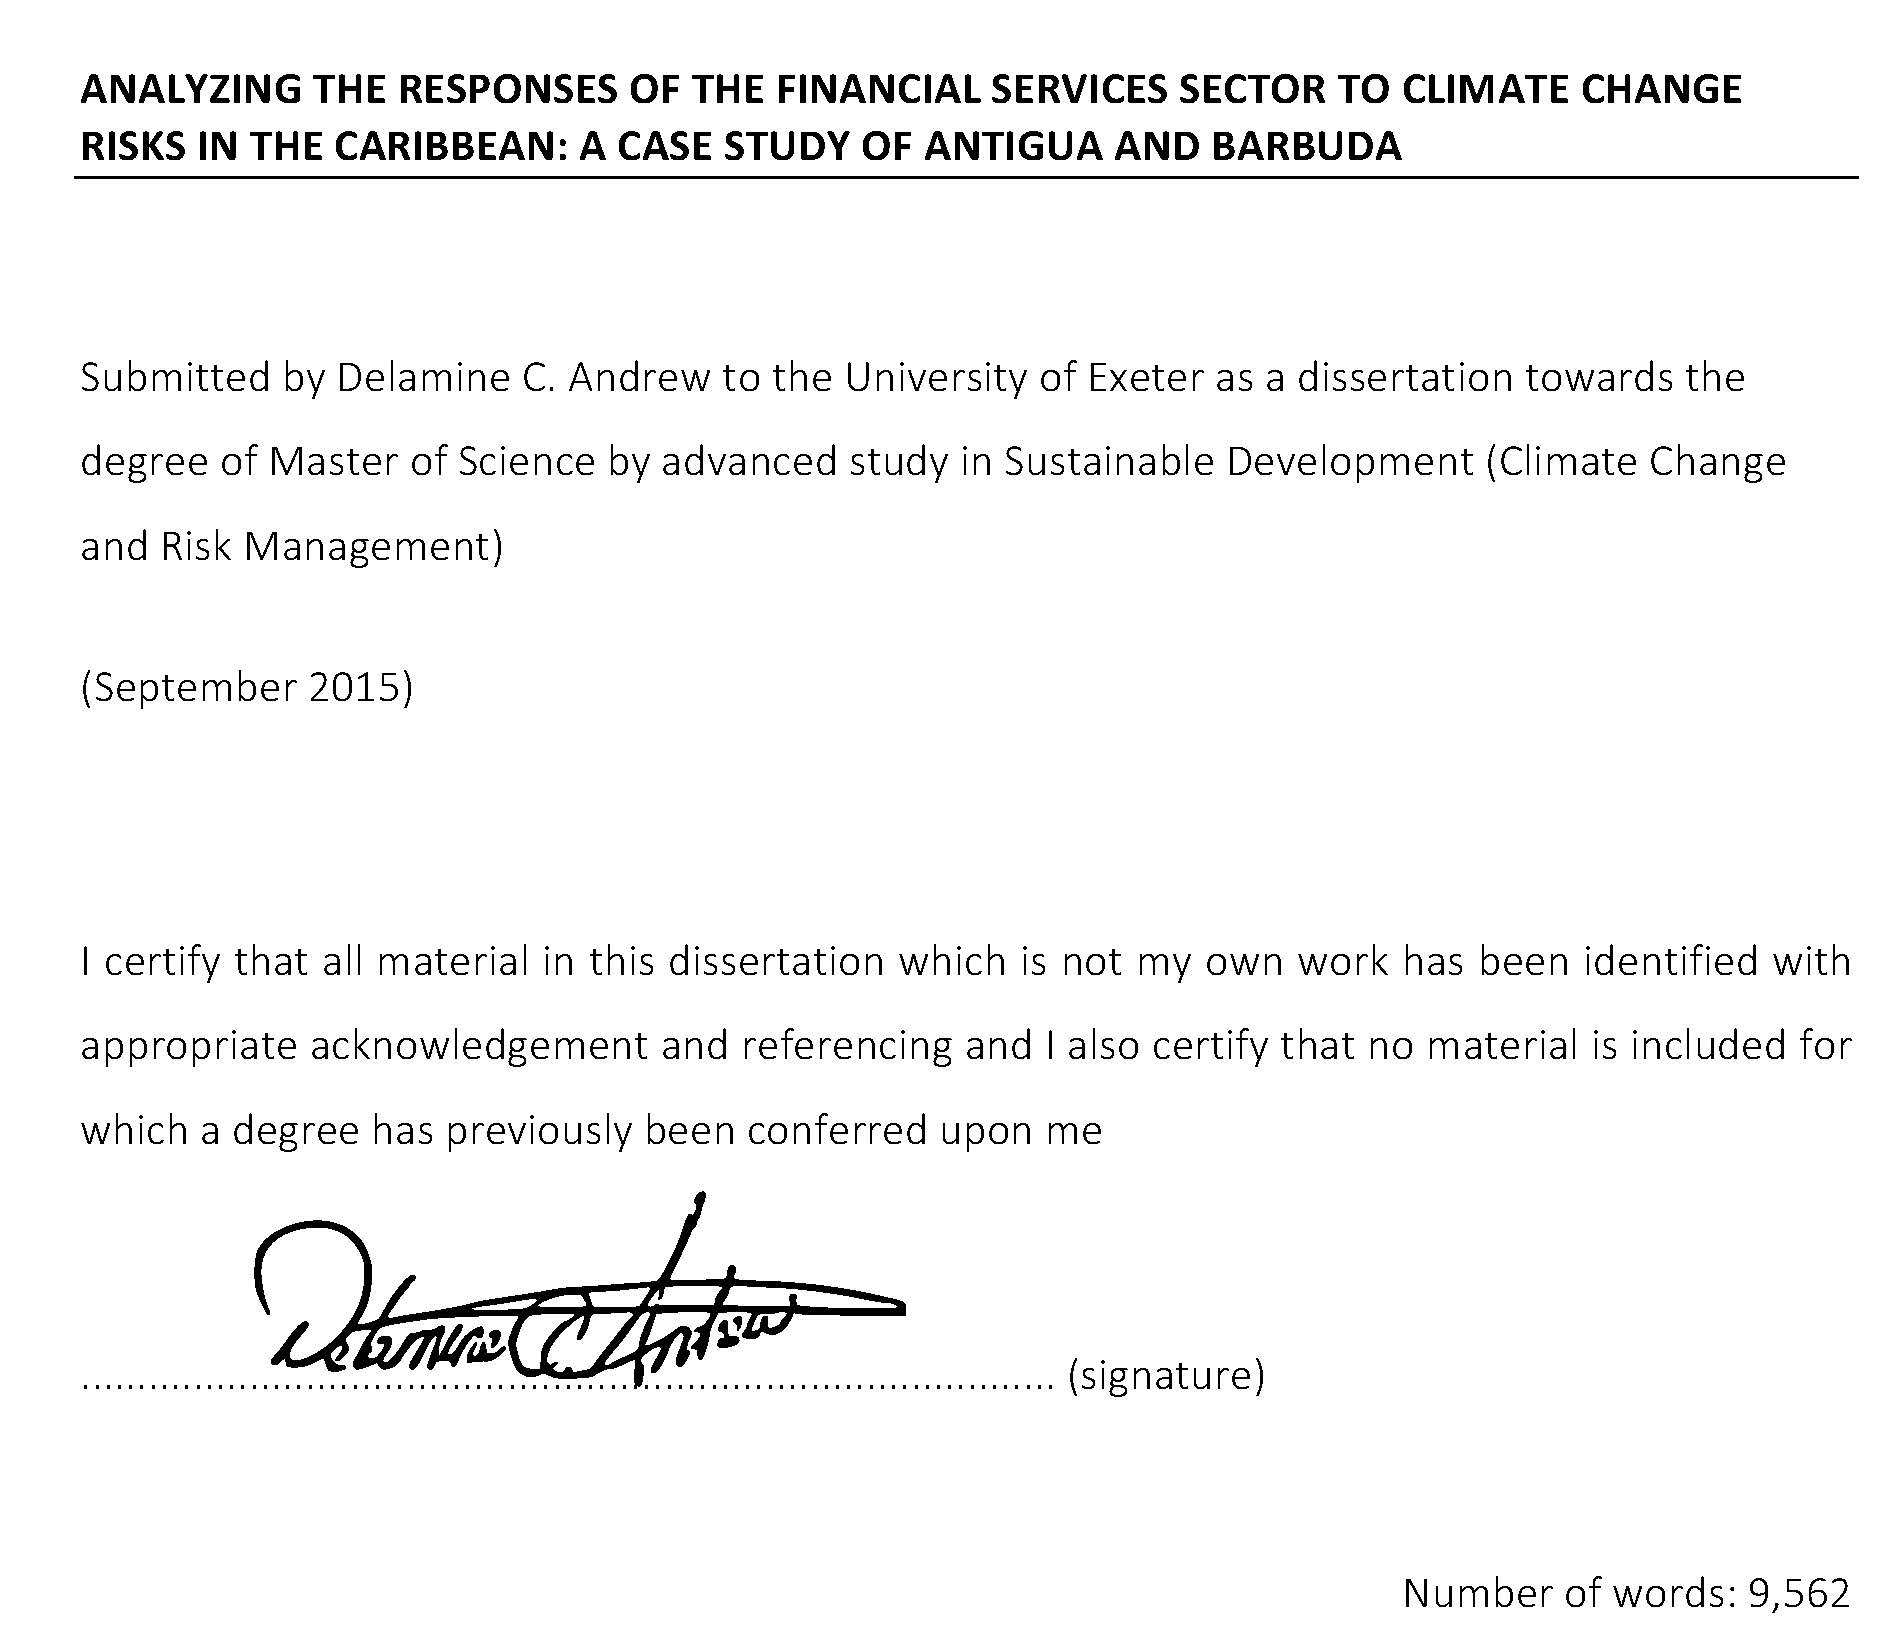 Analyzing the Responses of the Financial Services sector to Climate Change Risks in the Caribbean: a case study of Antigua and Barbuda